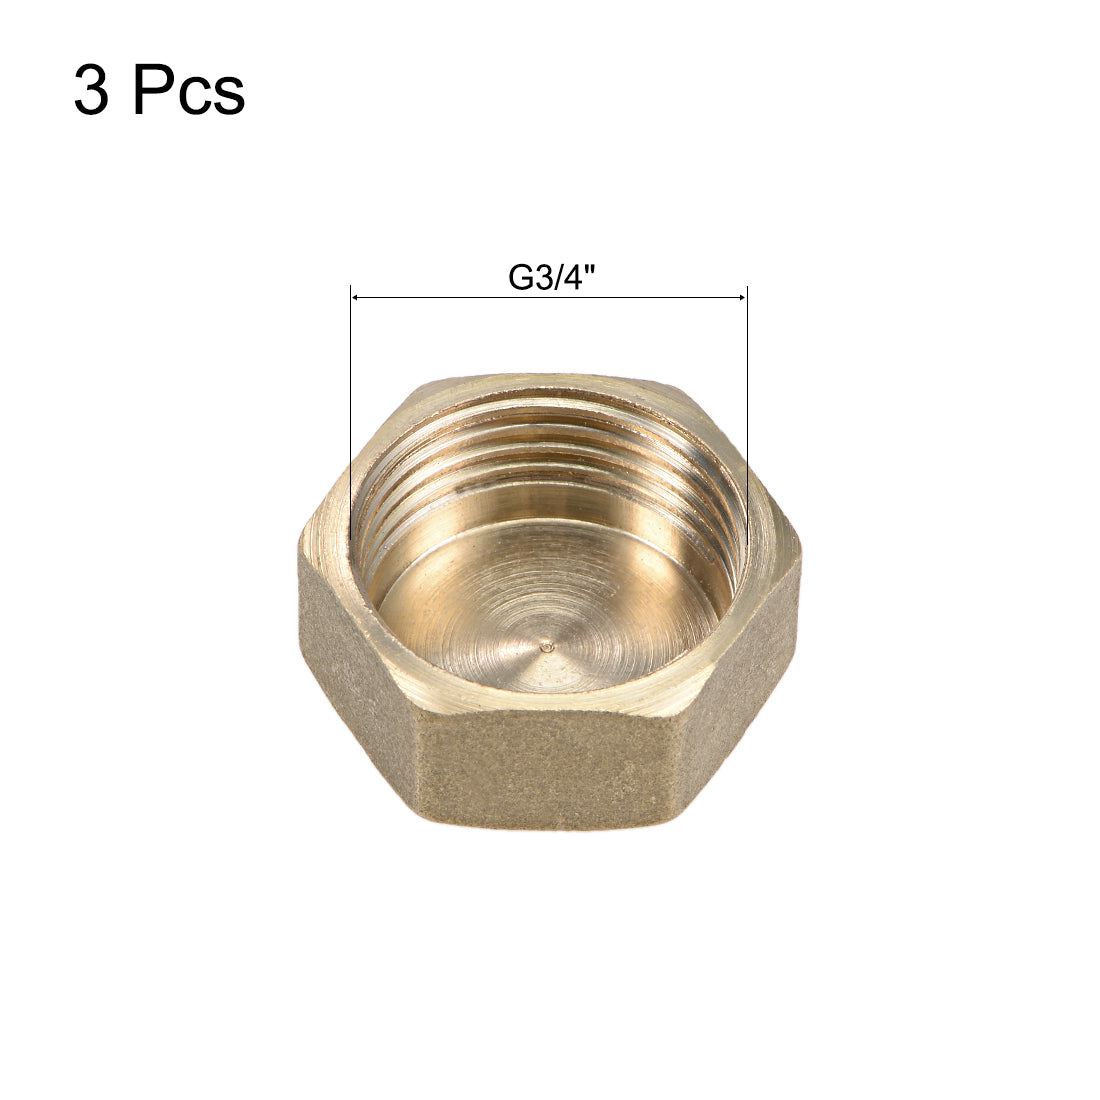 uxcell Uxcell 3/4 Inch Brass Cap 3pcs G3/4 Female Pipe Fitting Hex Compression Stop Valve Connector 13x30mm